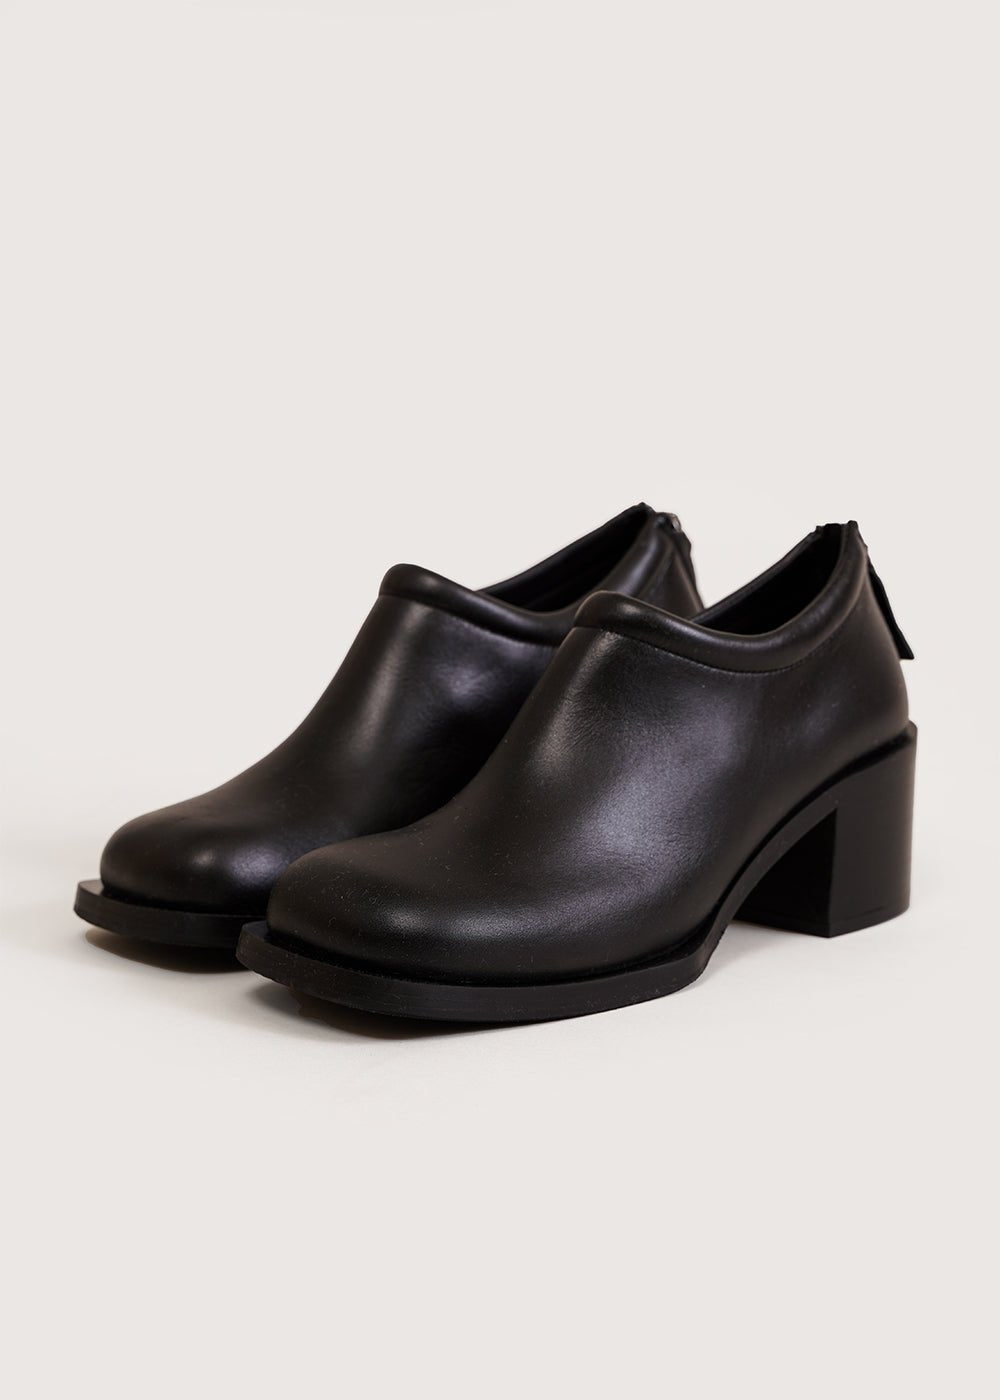 About Arianne Black Ava Pumps - New Classics Studios Sustainable Ethical Fashion Canada